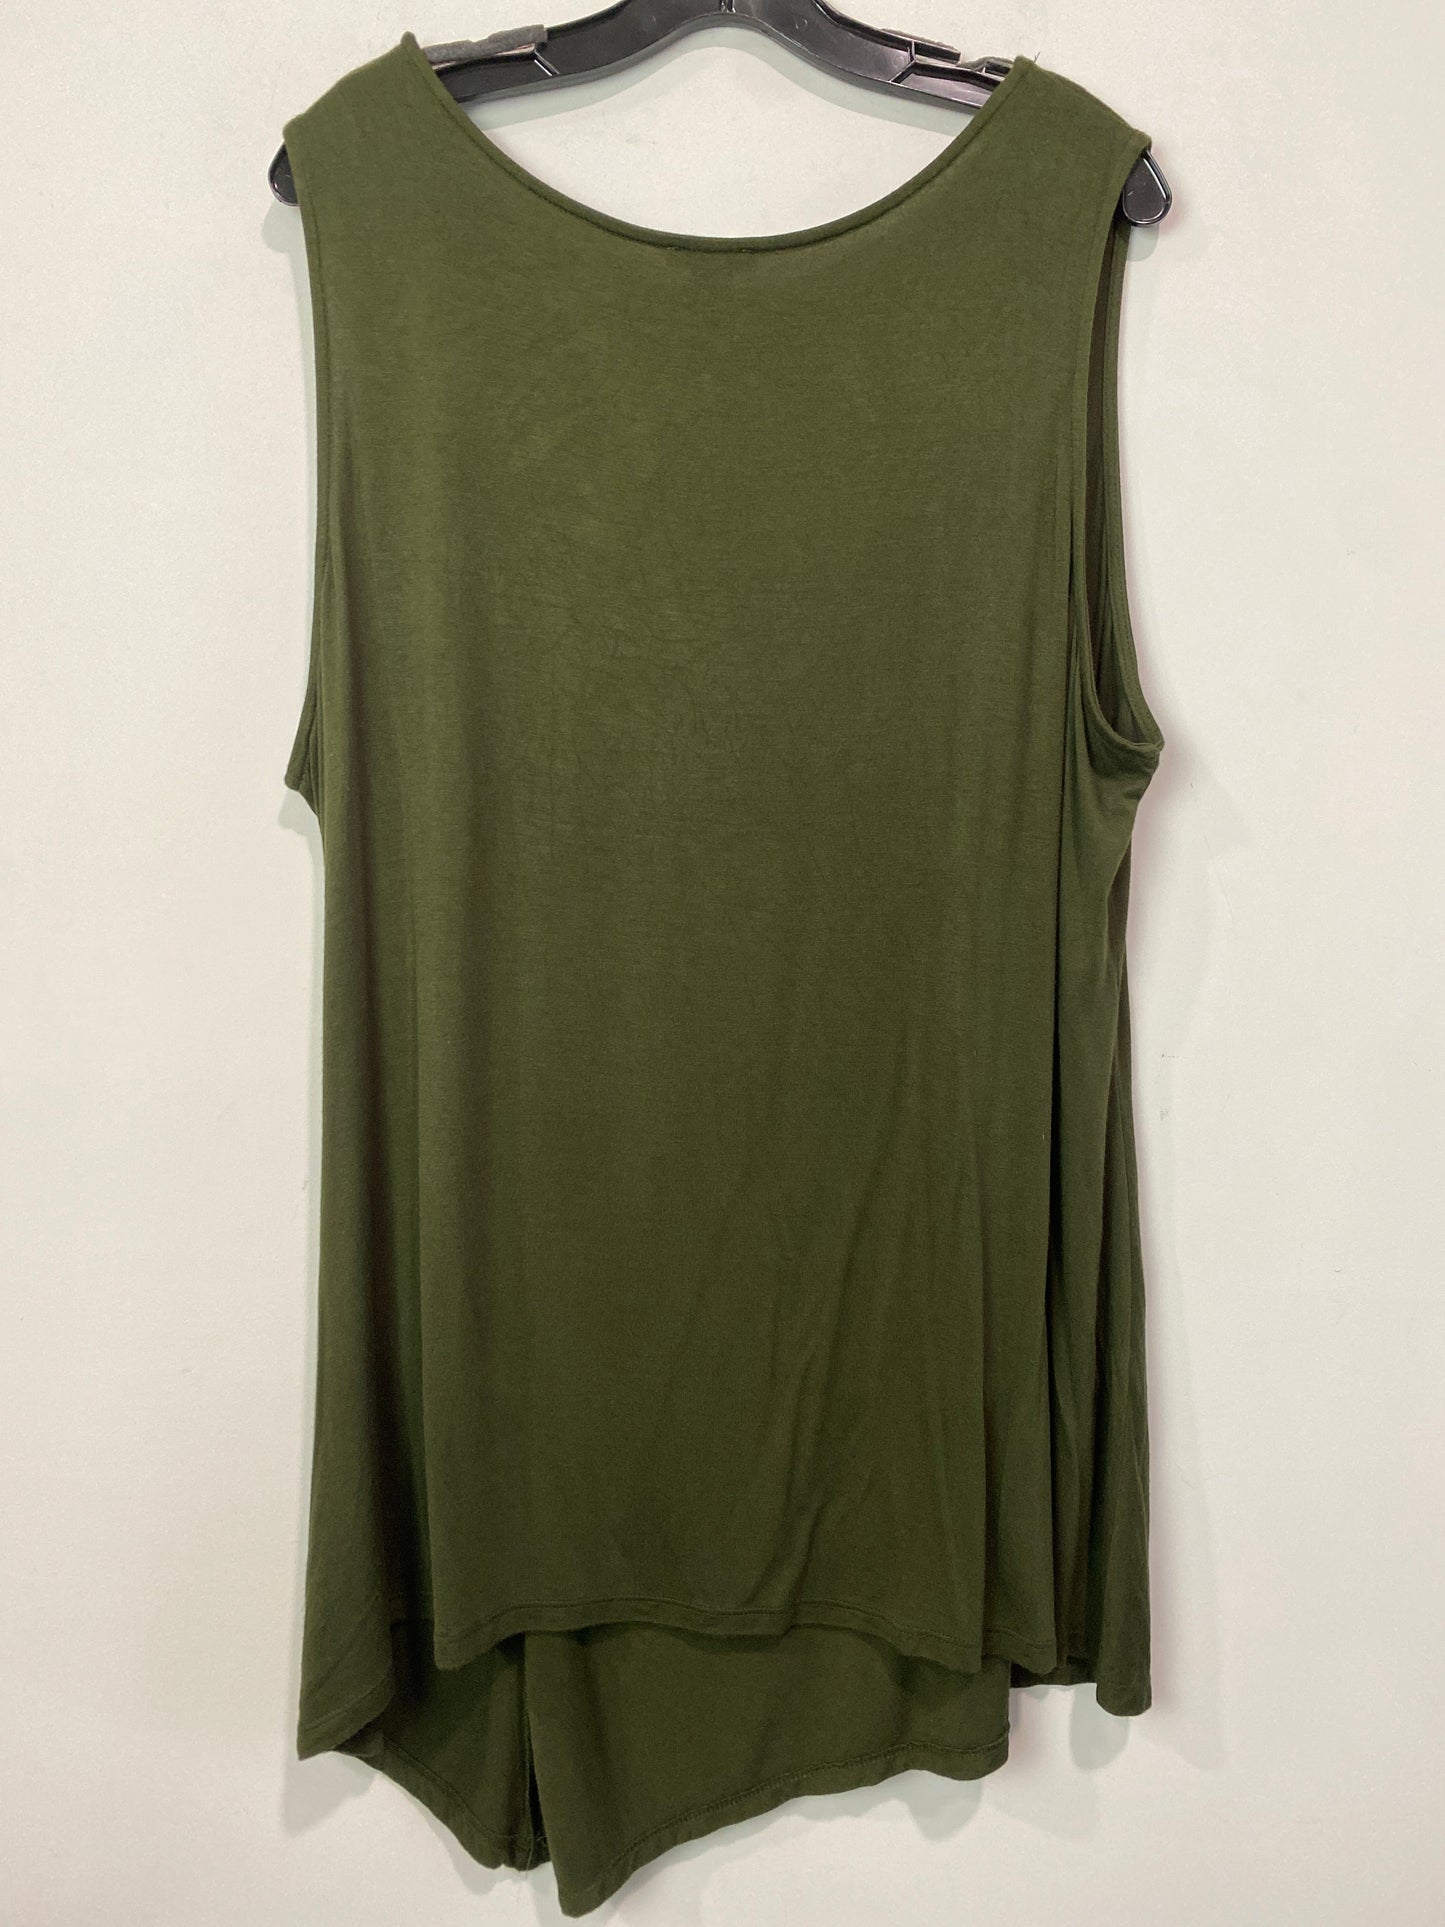 Green Tank Top New Directions, Size 3x